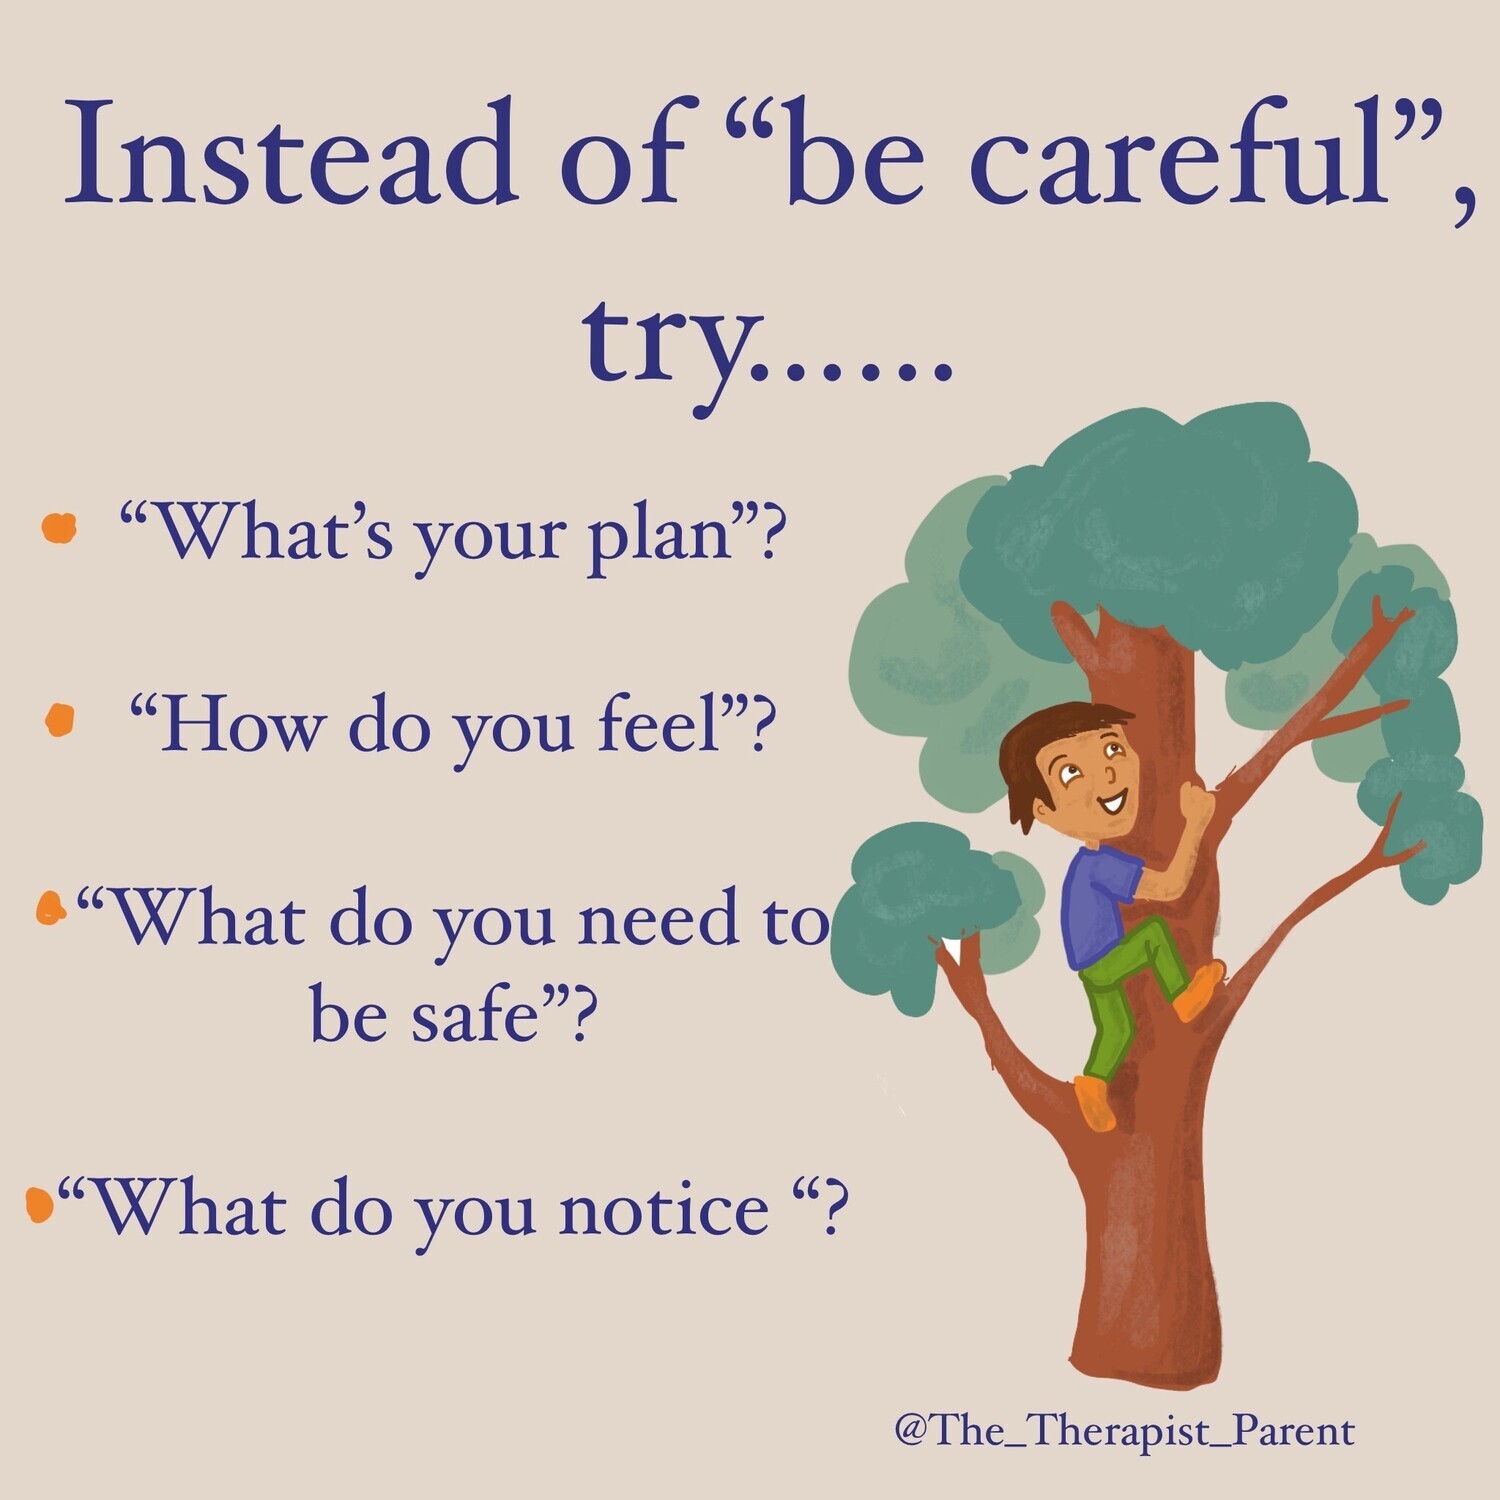 Downloadable Poster - Instead of "be careful"